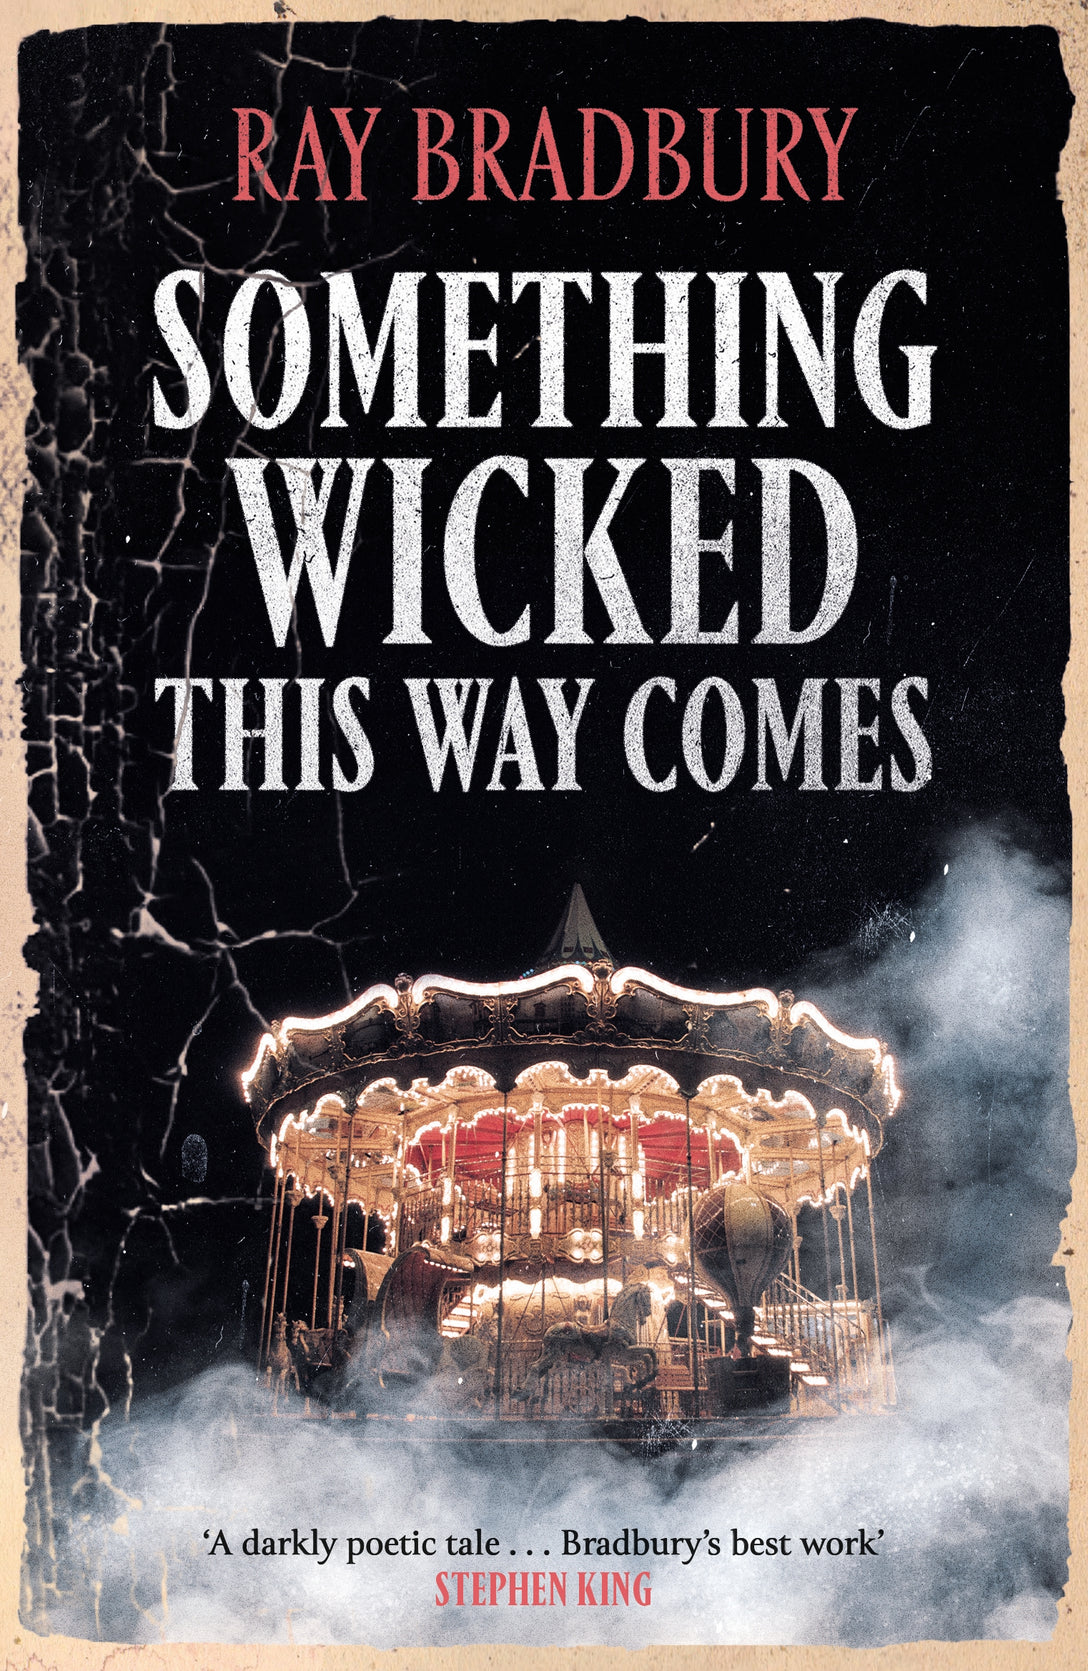 Something Wicked This Way Comes by Ray Bradbury